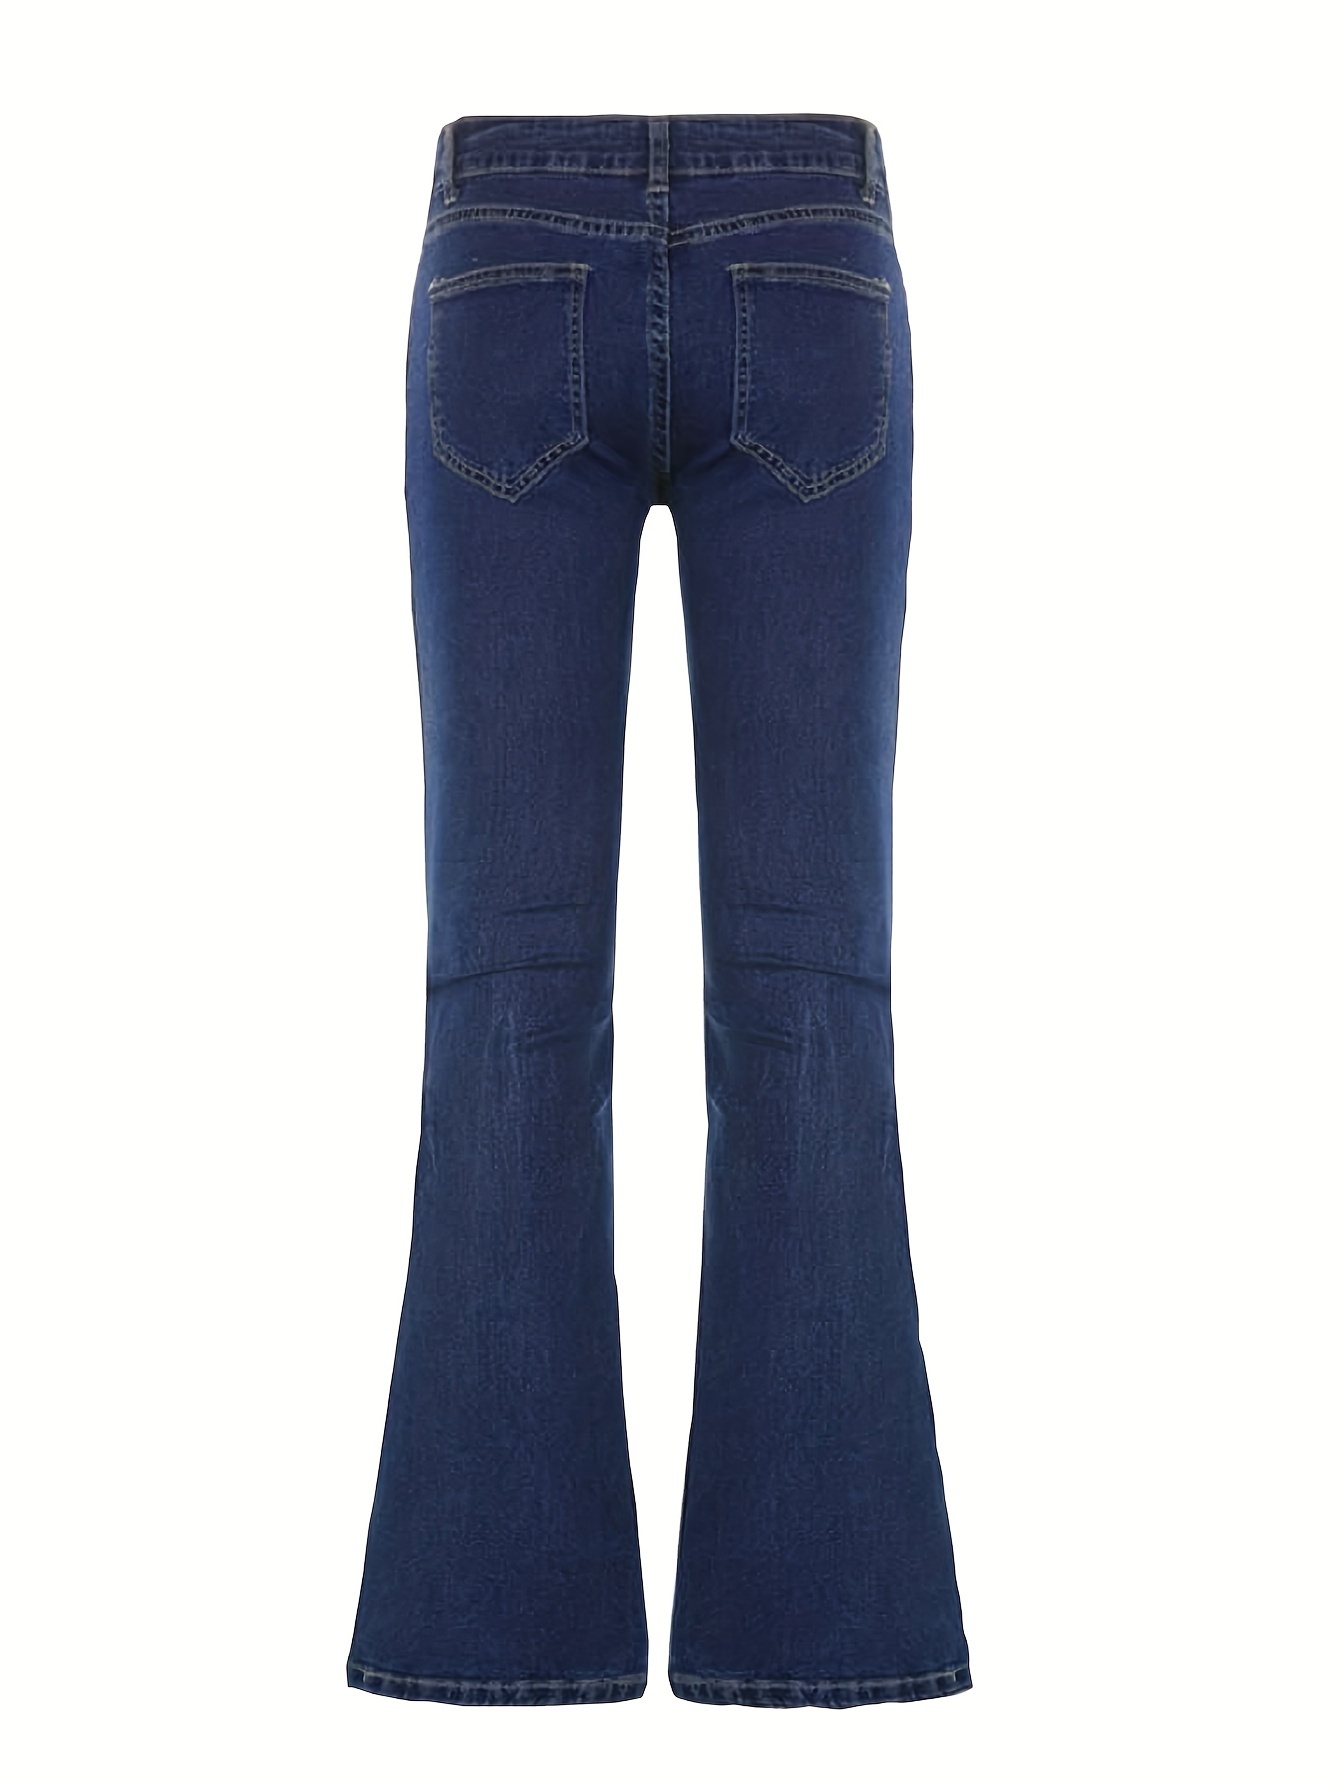 Blue Star Print Flare Jeans, High Stretch Y2K Style Bell Bottom Jeans,  Women's Denim Jeans & Clothing - Perfect For Carnaval Music Festival